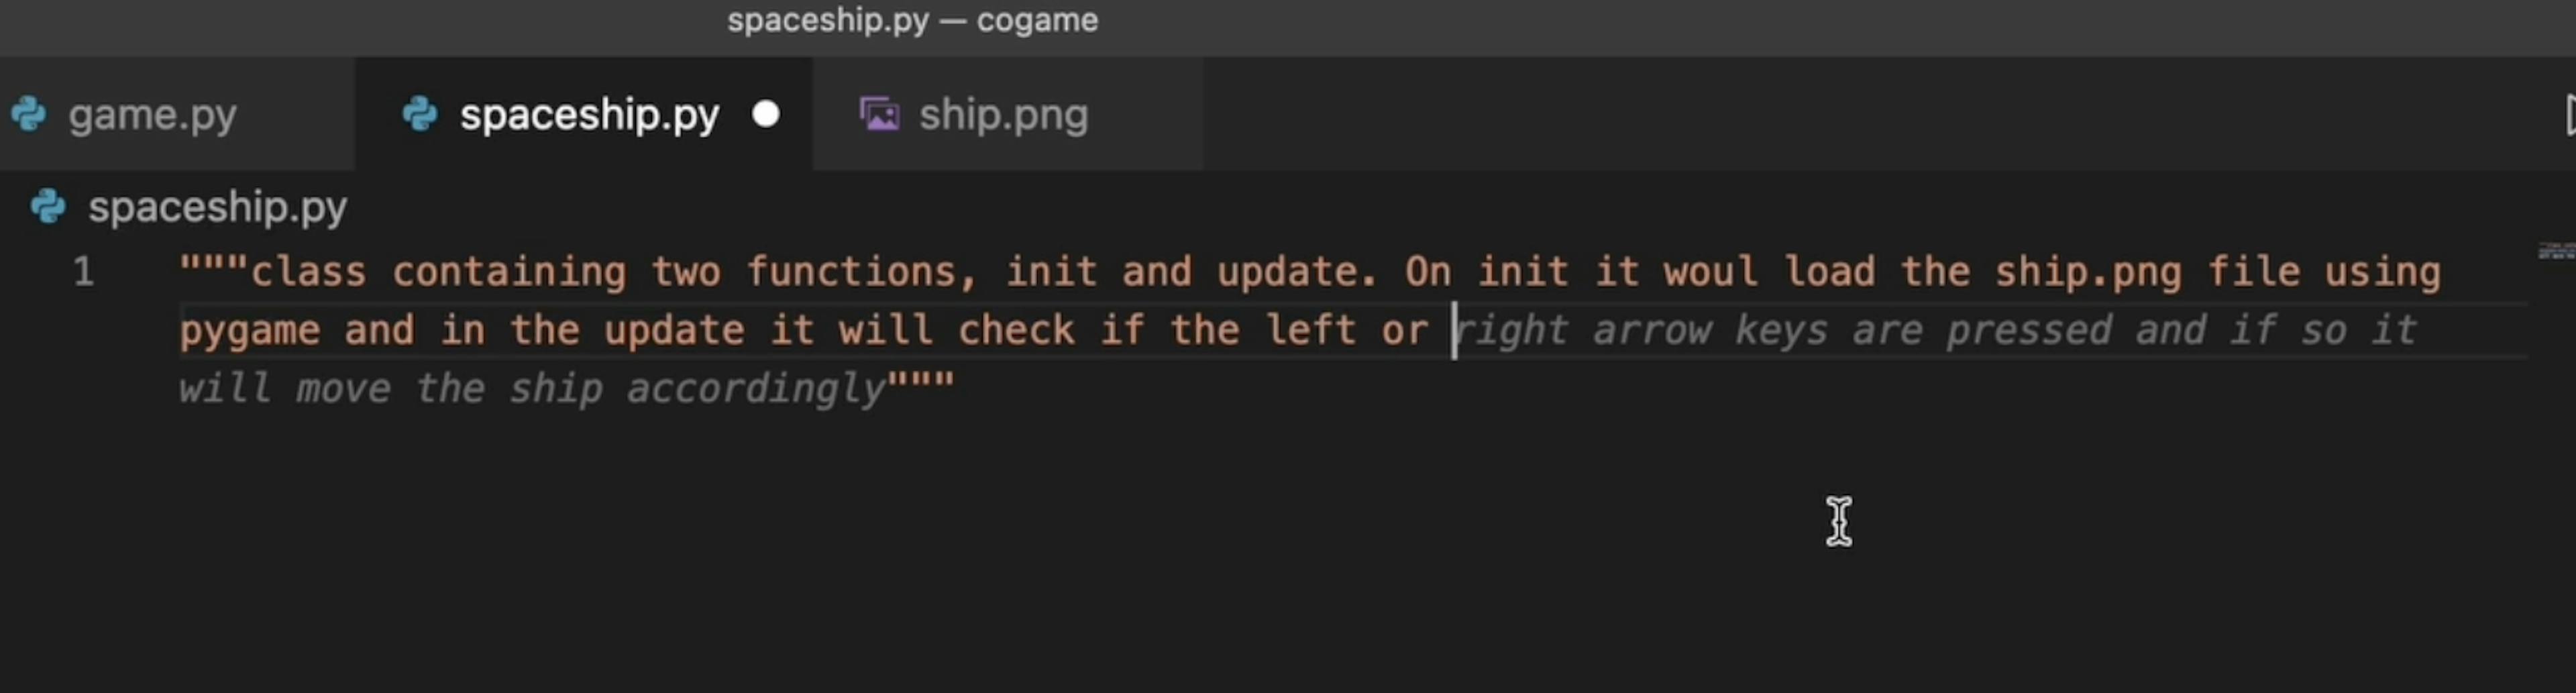 Copilot not only write the code, but also suggests what you might want it to do